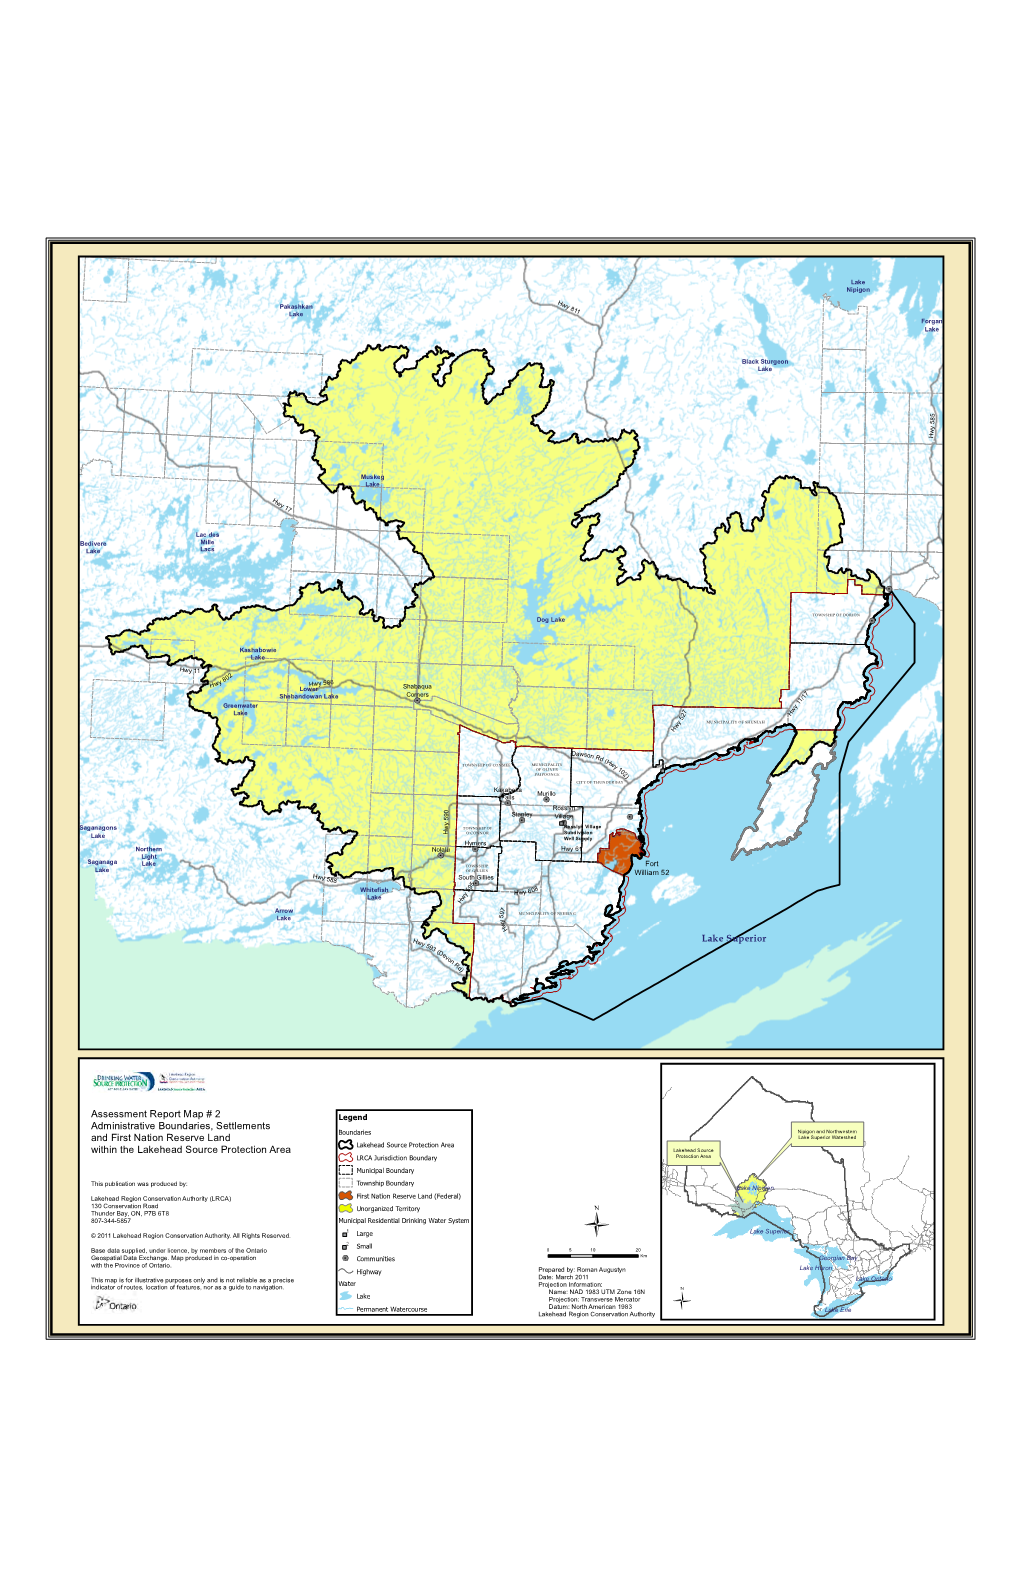 Lake Superior Assessment Report Map # 2 Administrative Boundaries, Settlements and First Nation Reserve Land Within the Lakehead